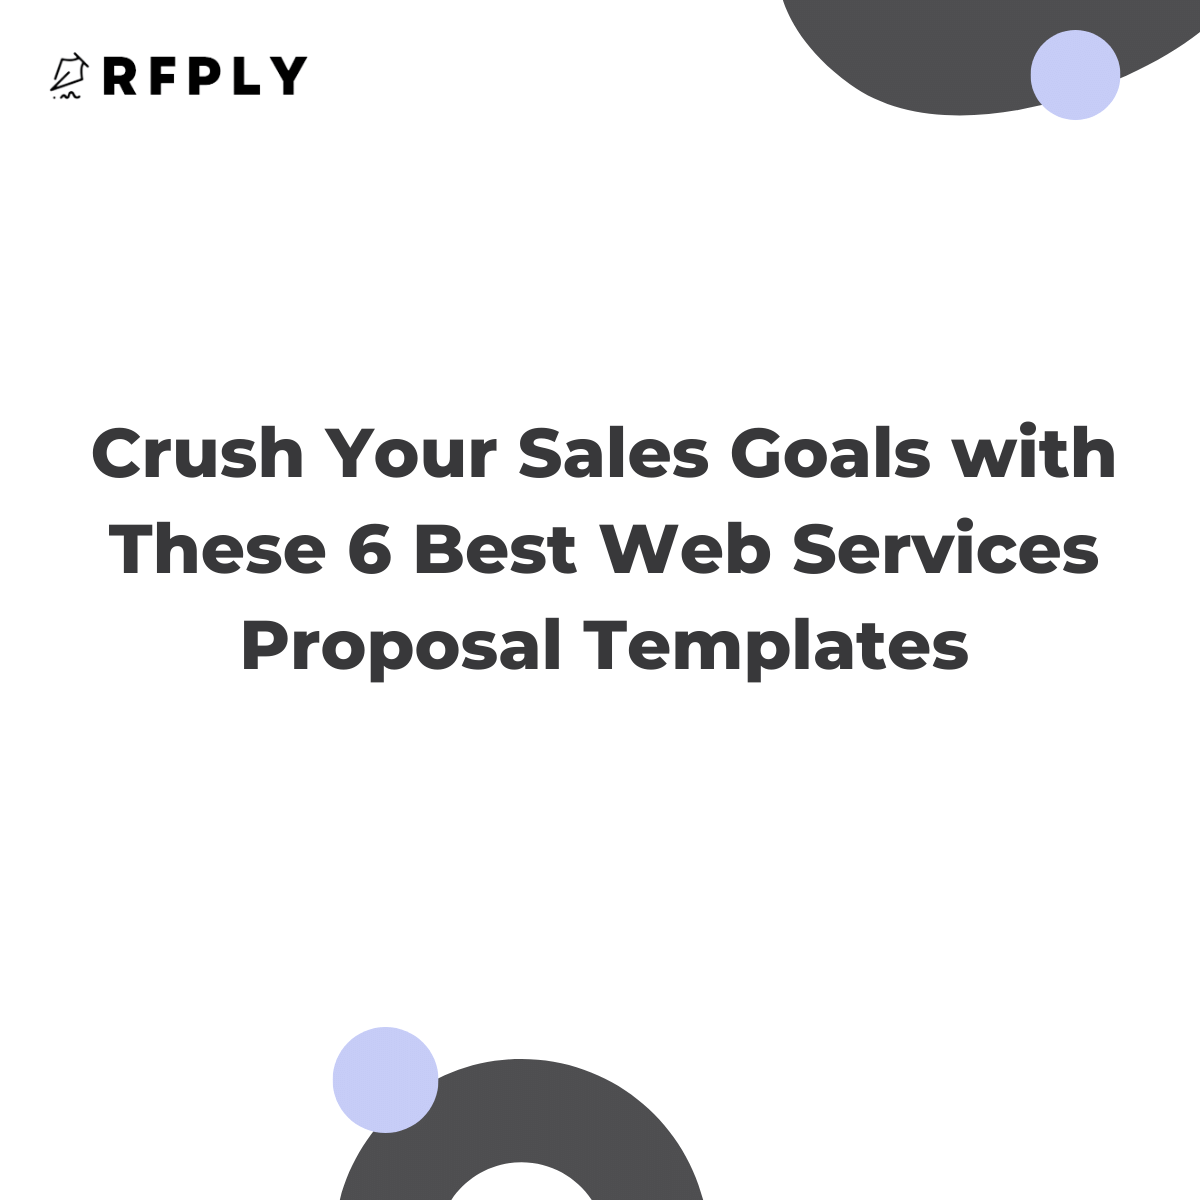 Crush Your Sales Goals with These 6 Best Web Services Proposal Templates